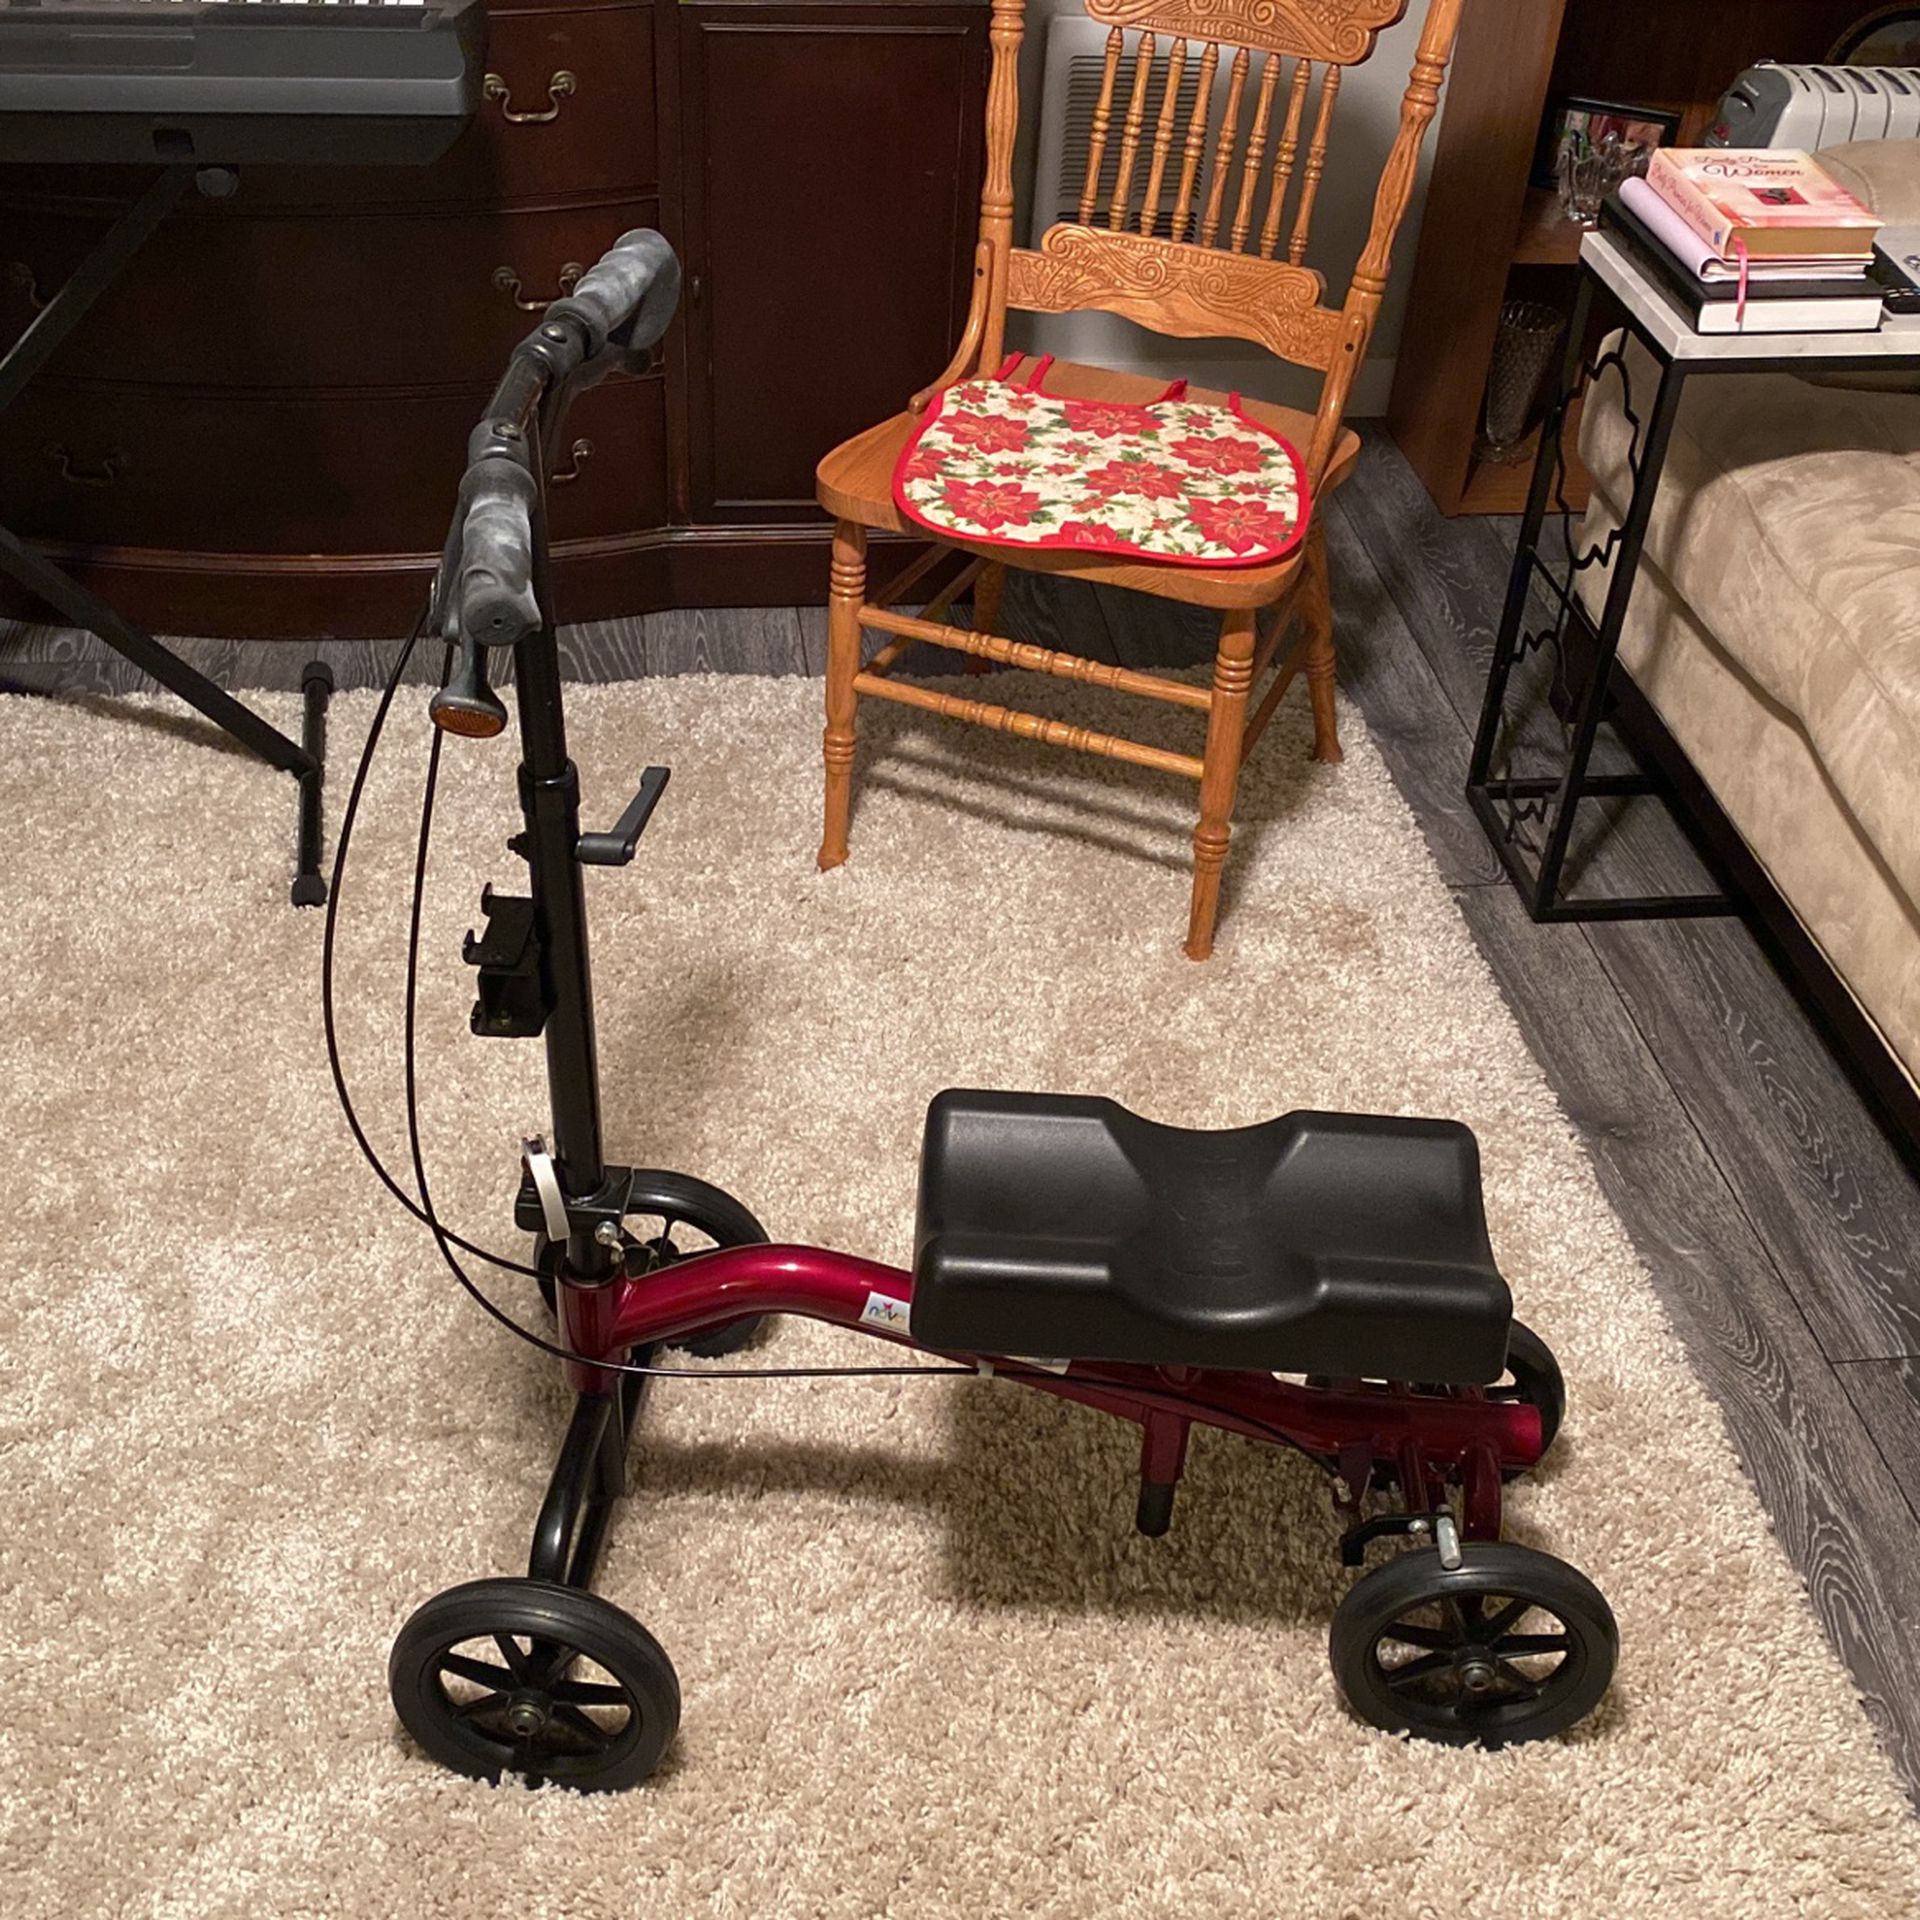  Knee scooter Rated for up to 400 pounds